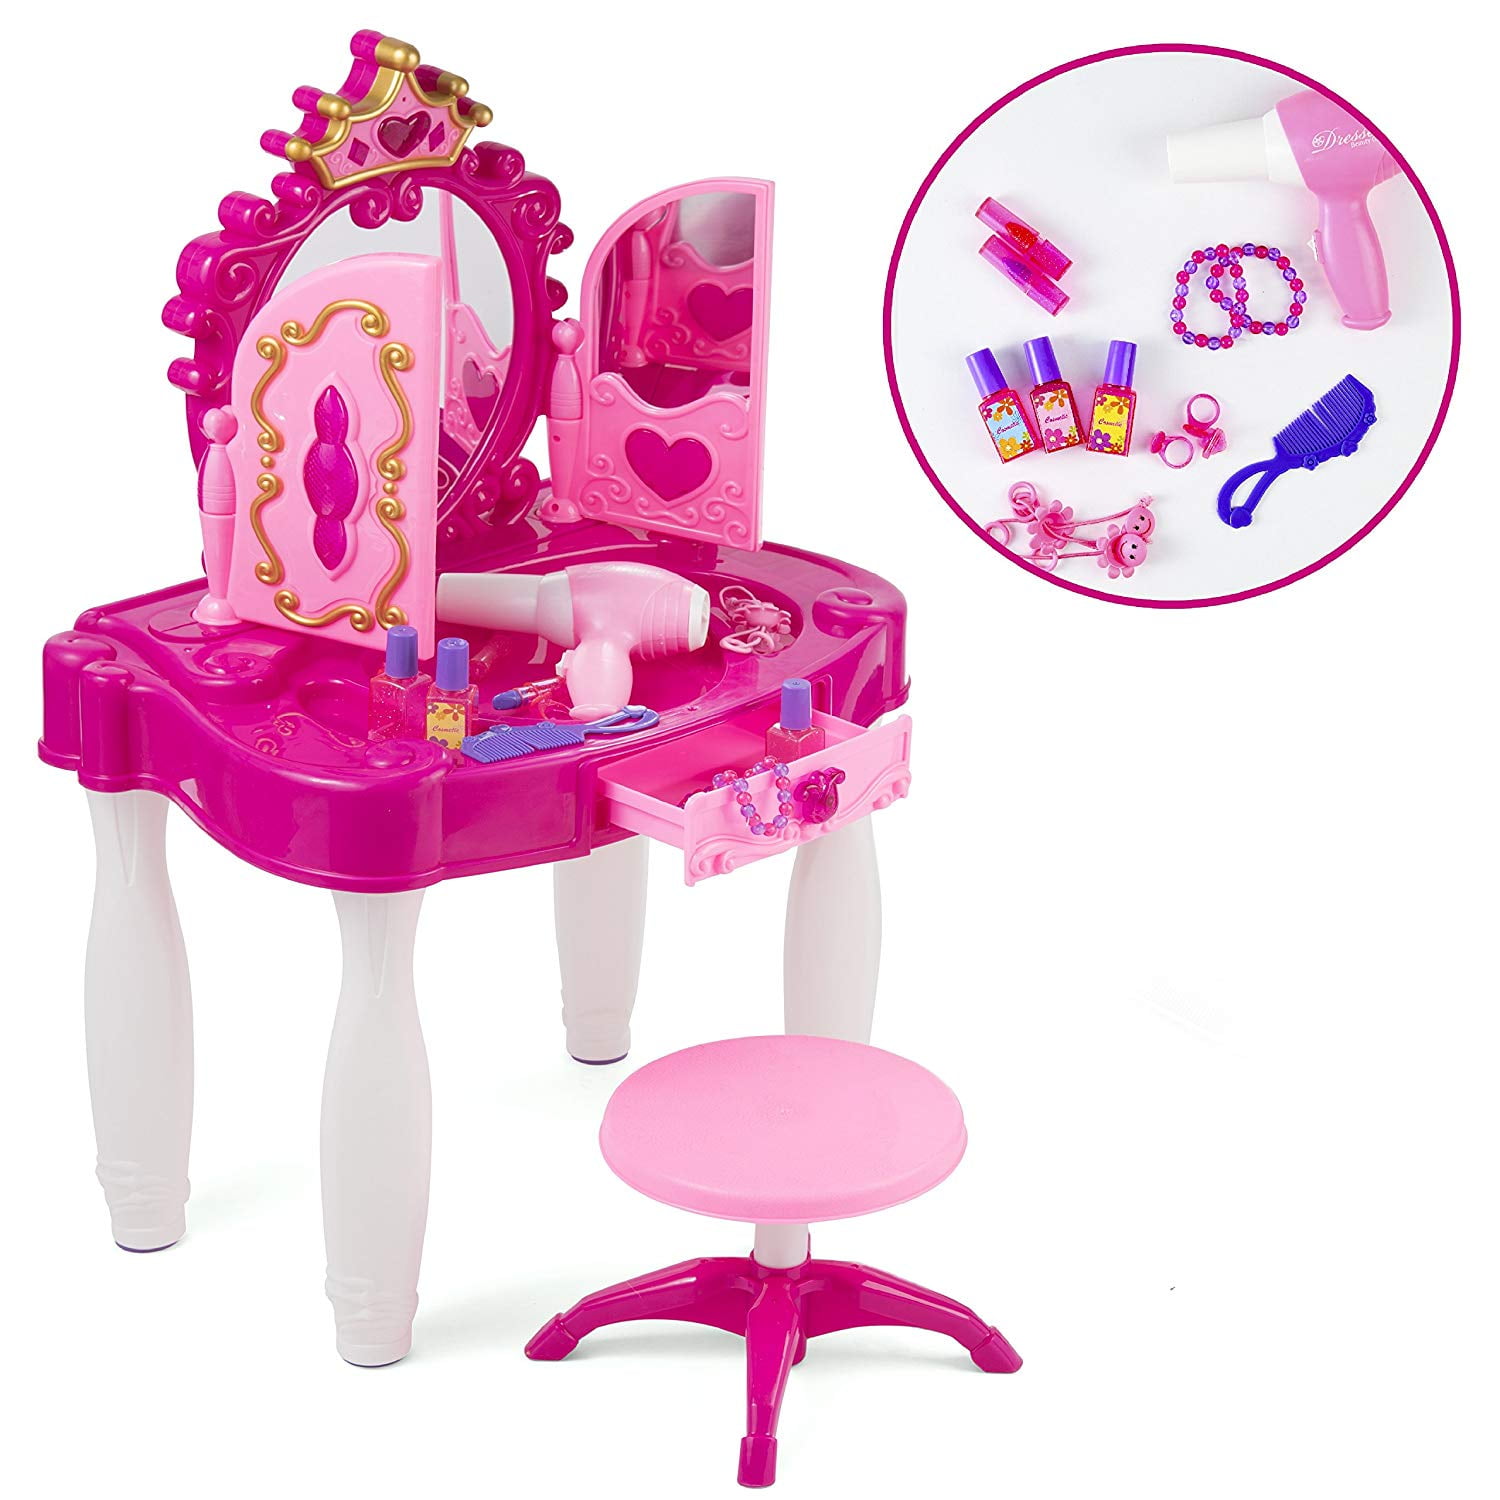 Girls Fashion Beauty Dressing Vanity Table With Mirror